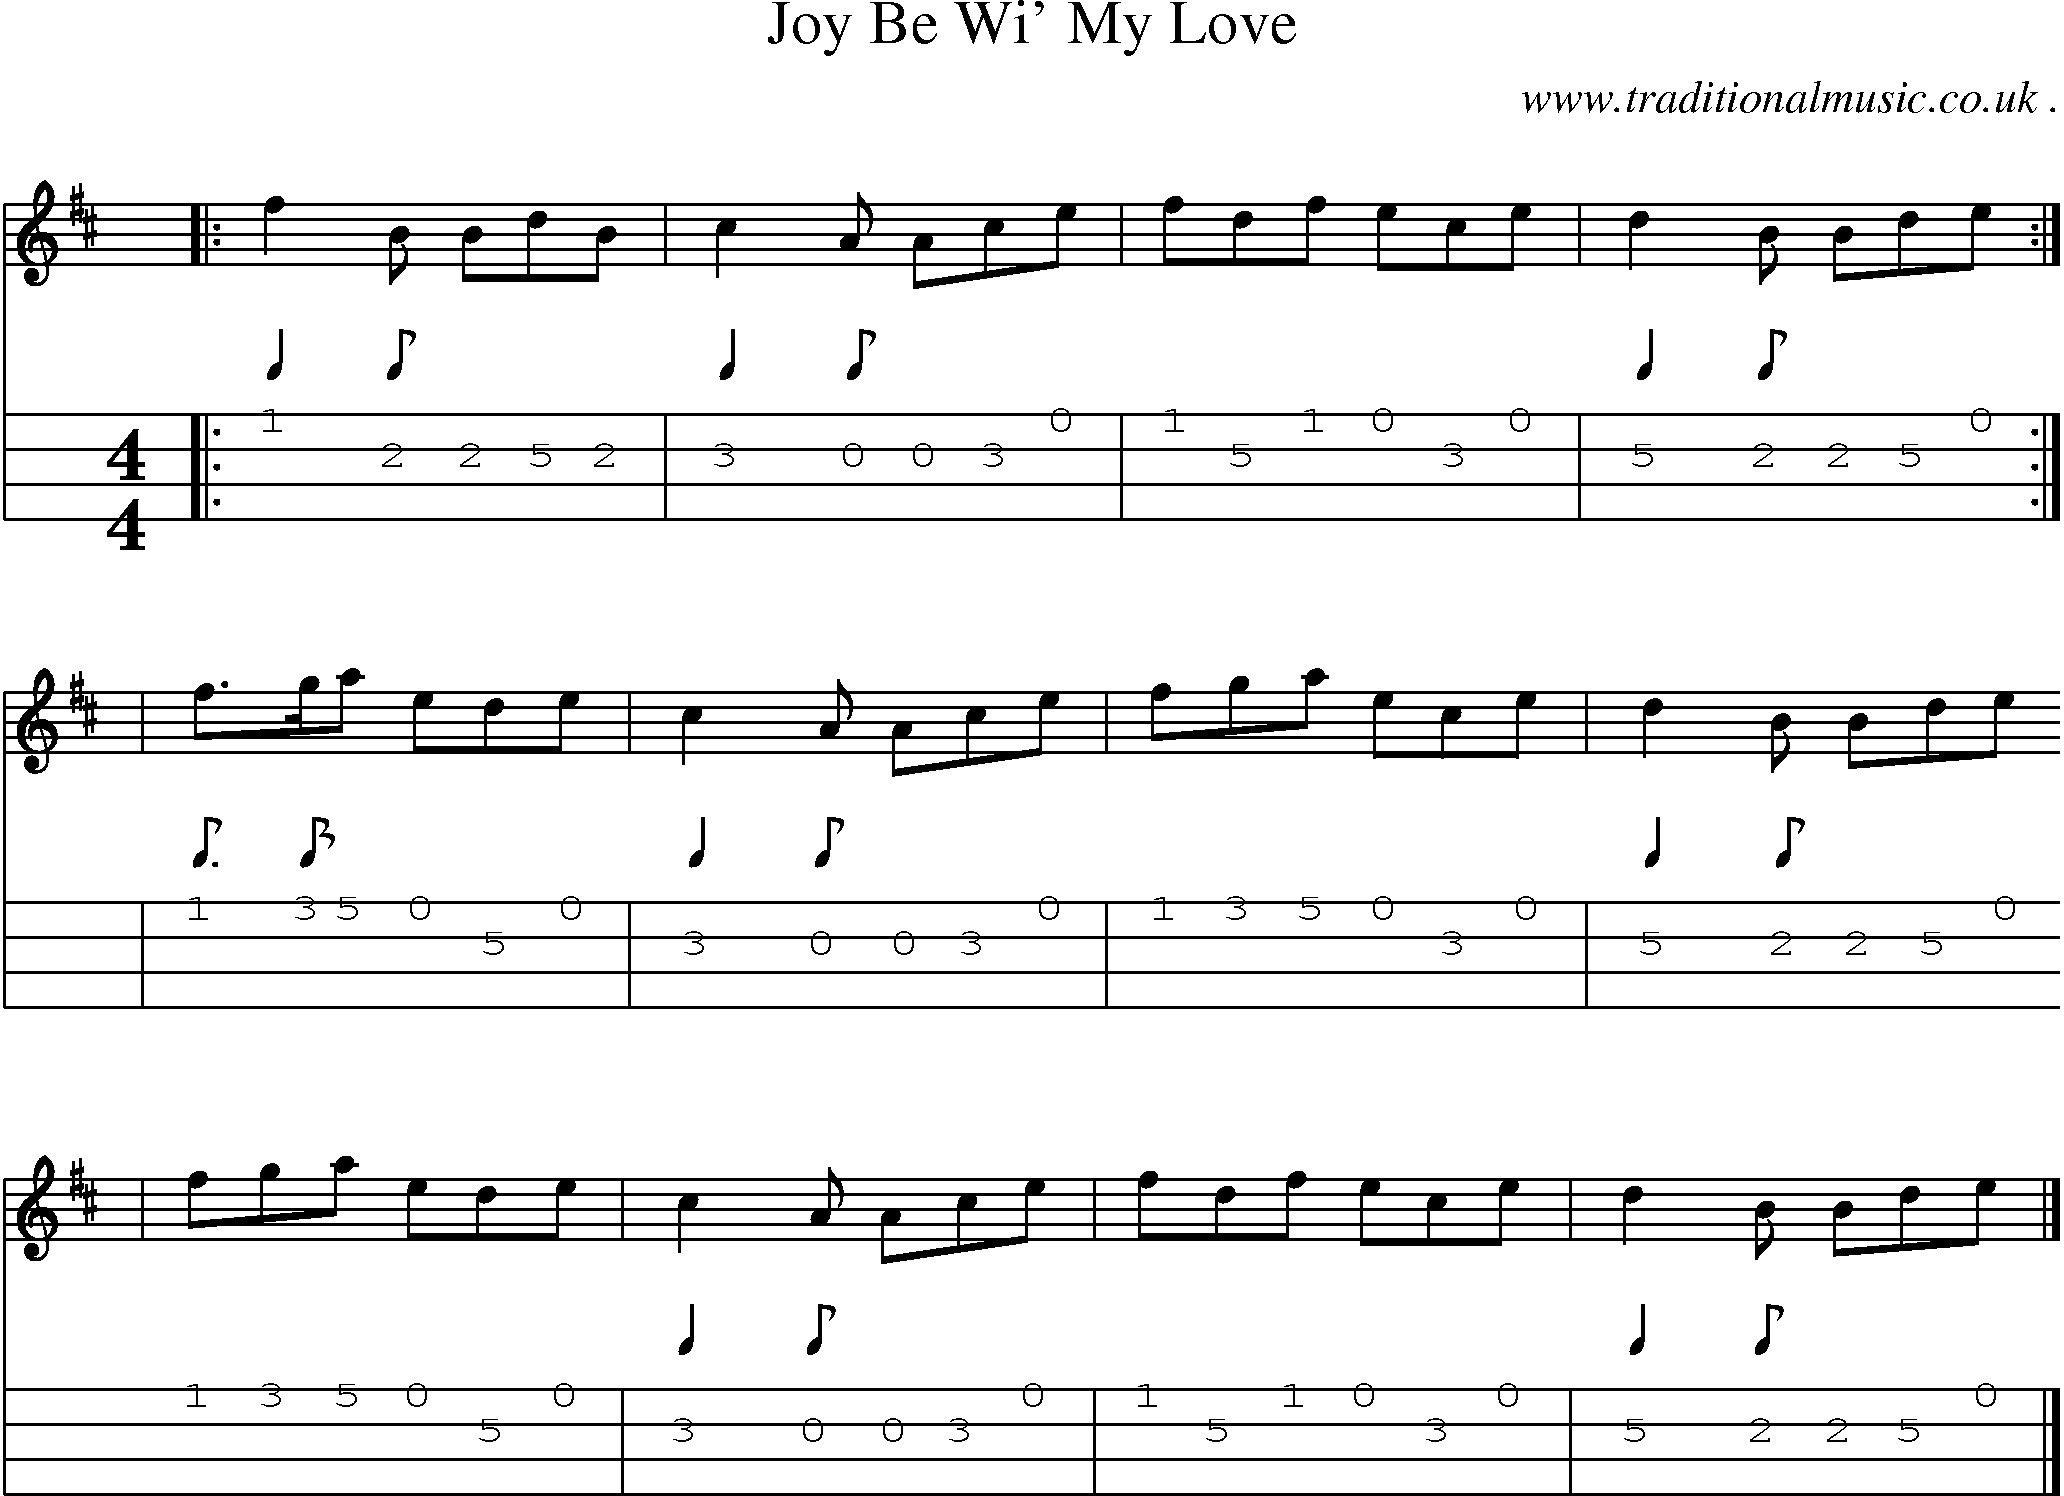 Sheet-music  score, Chords and Mandolin Tabs for Joy Be Wi My Love